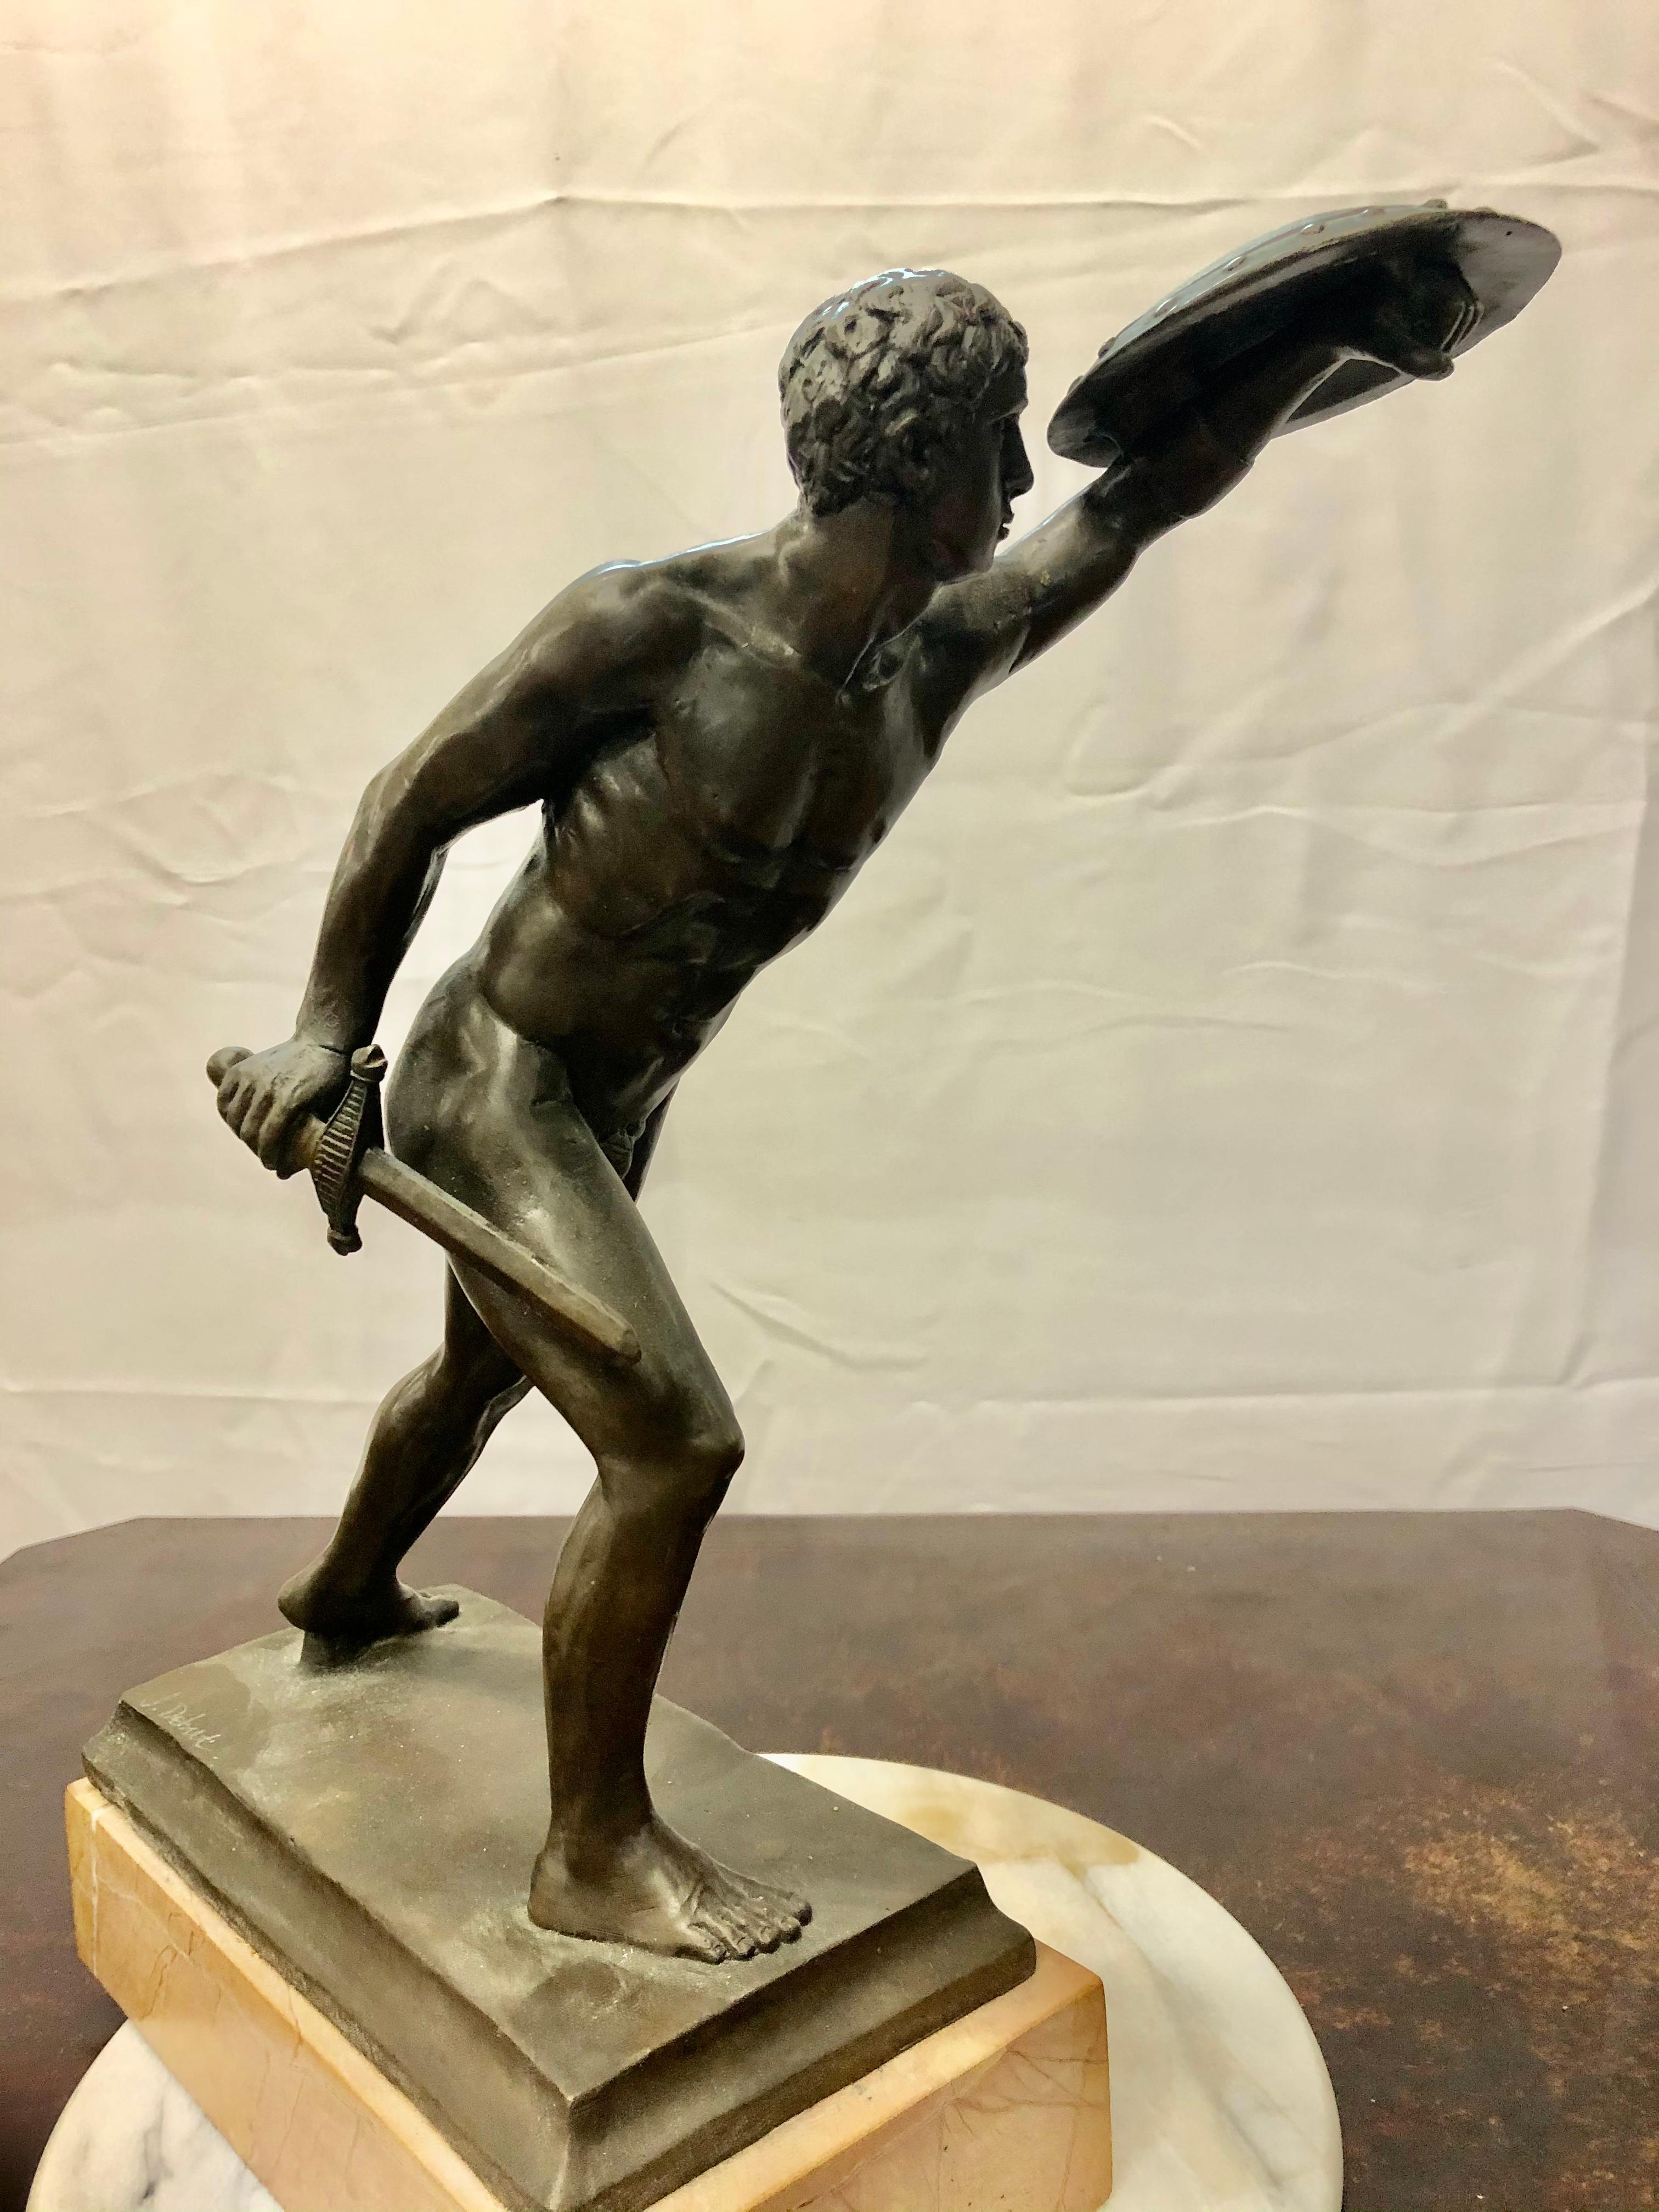 Jean Didier Debut: 1824-1893. Well listed 19th century French sculptor. He has had auction results over $17,000. We believe this fabulous bronze gladiator to be very rare as we could not find another example. The height including base is 16 inches.